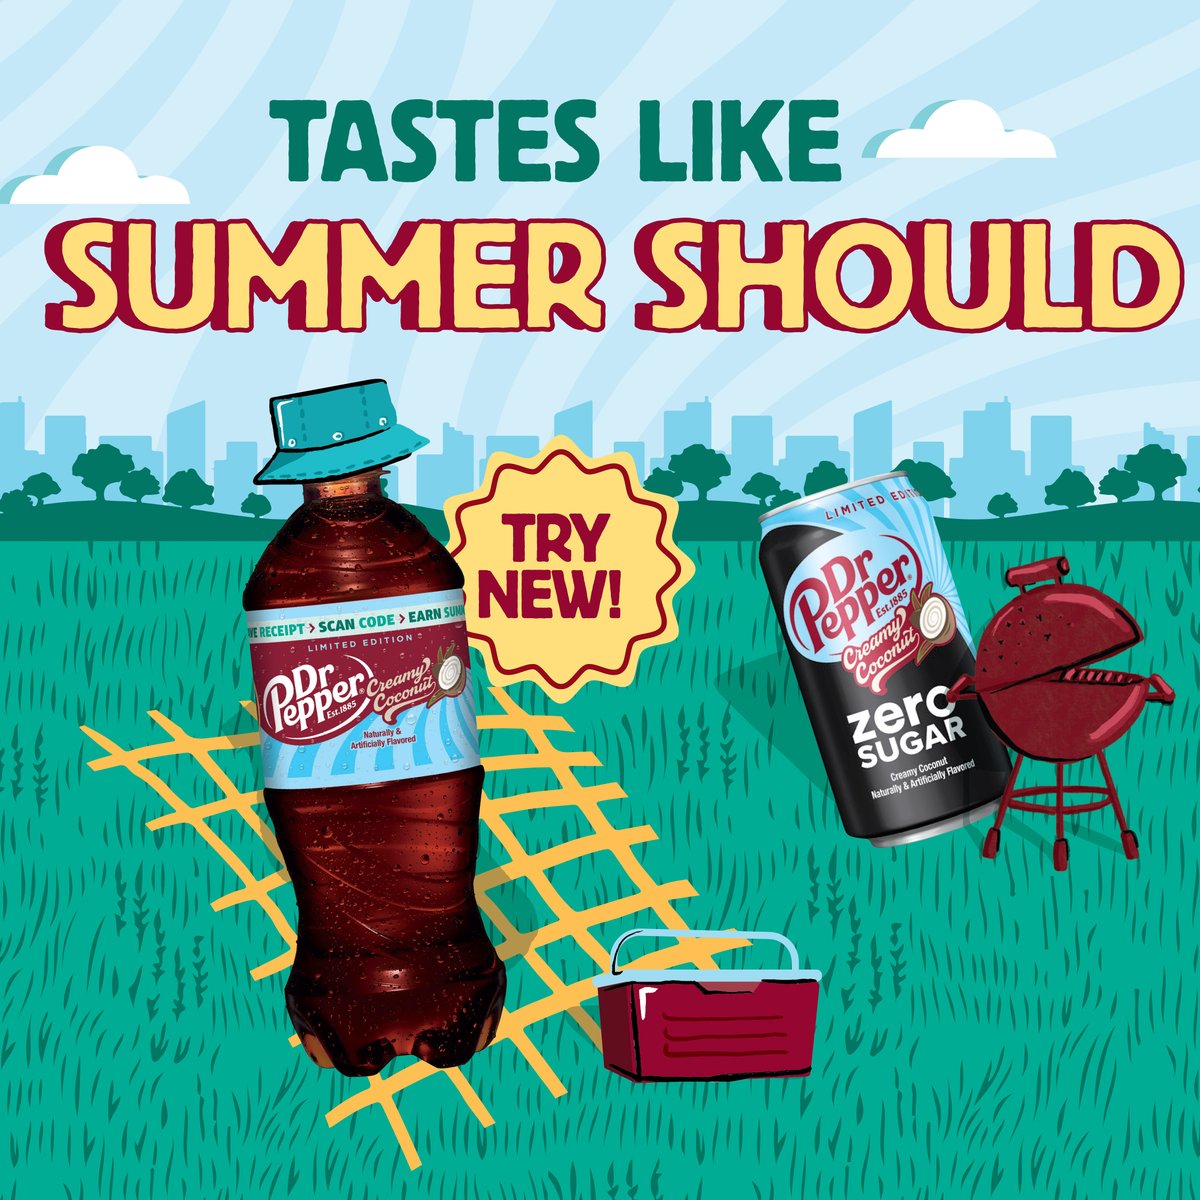 Savor the summer flavors with new, smooth, and refreshing Dr Pepper Creamy Coconut. Now available for a limited time!